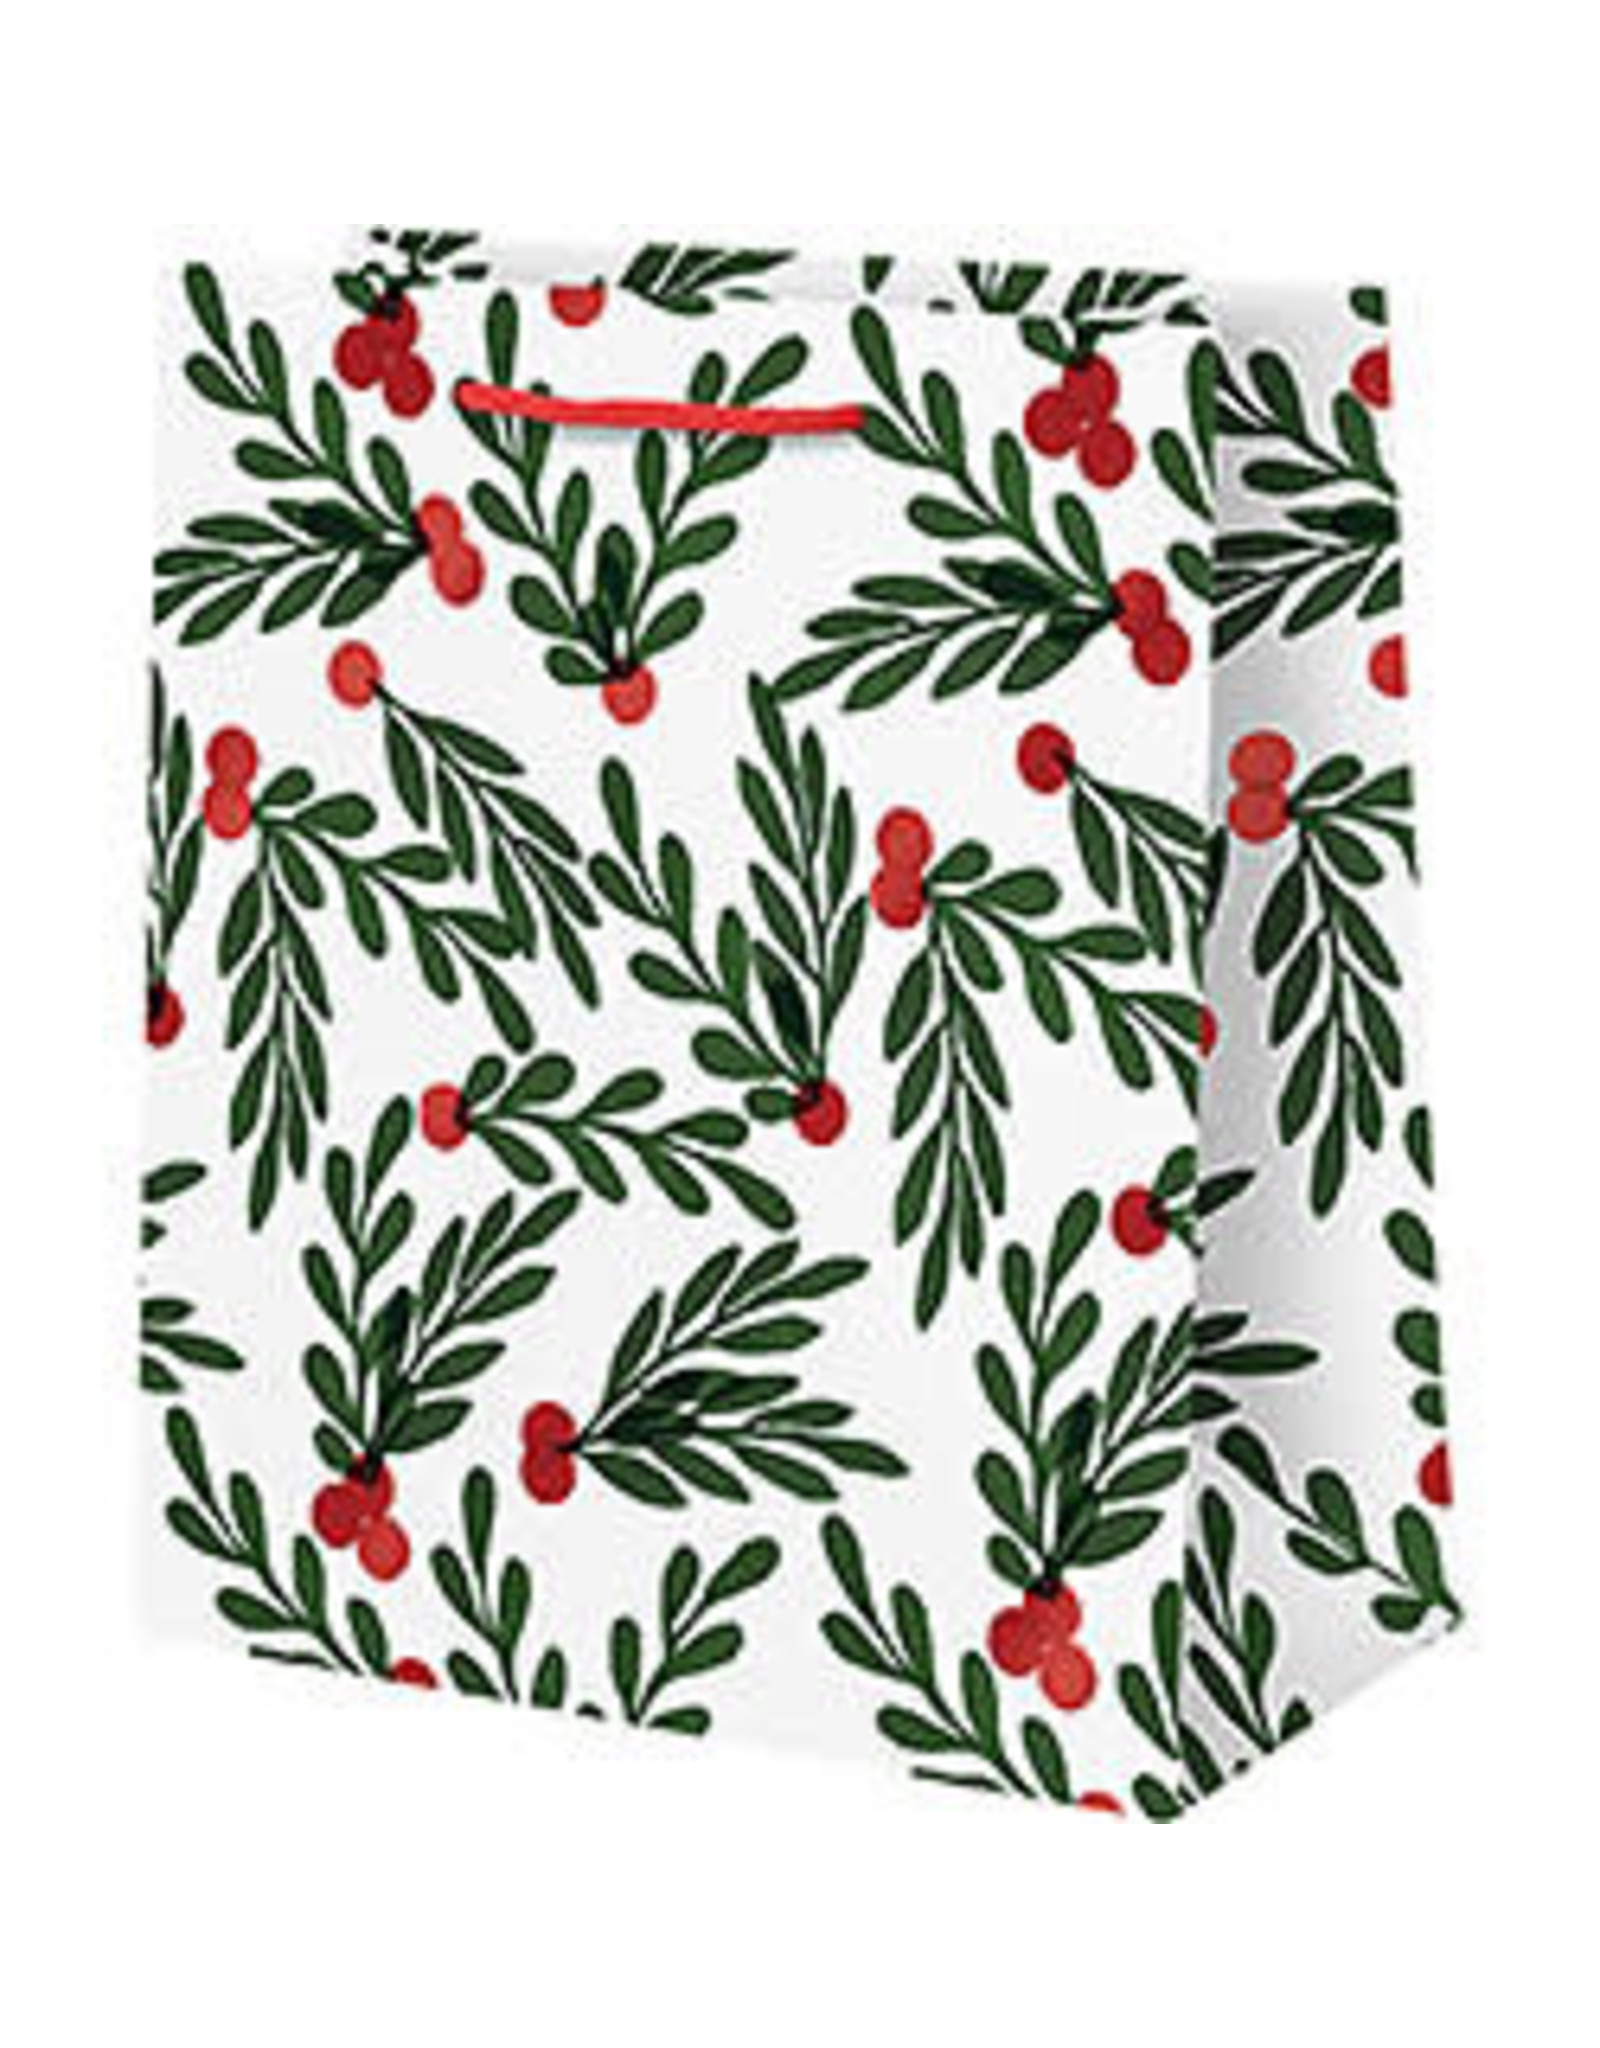 Waste Not Paper Medium Red Berries with Leaves Christmas Bag